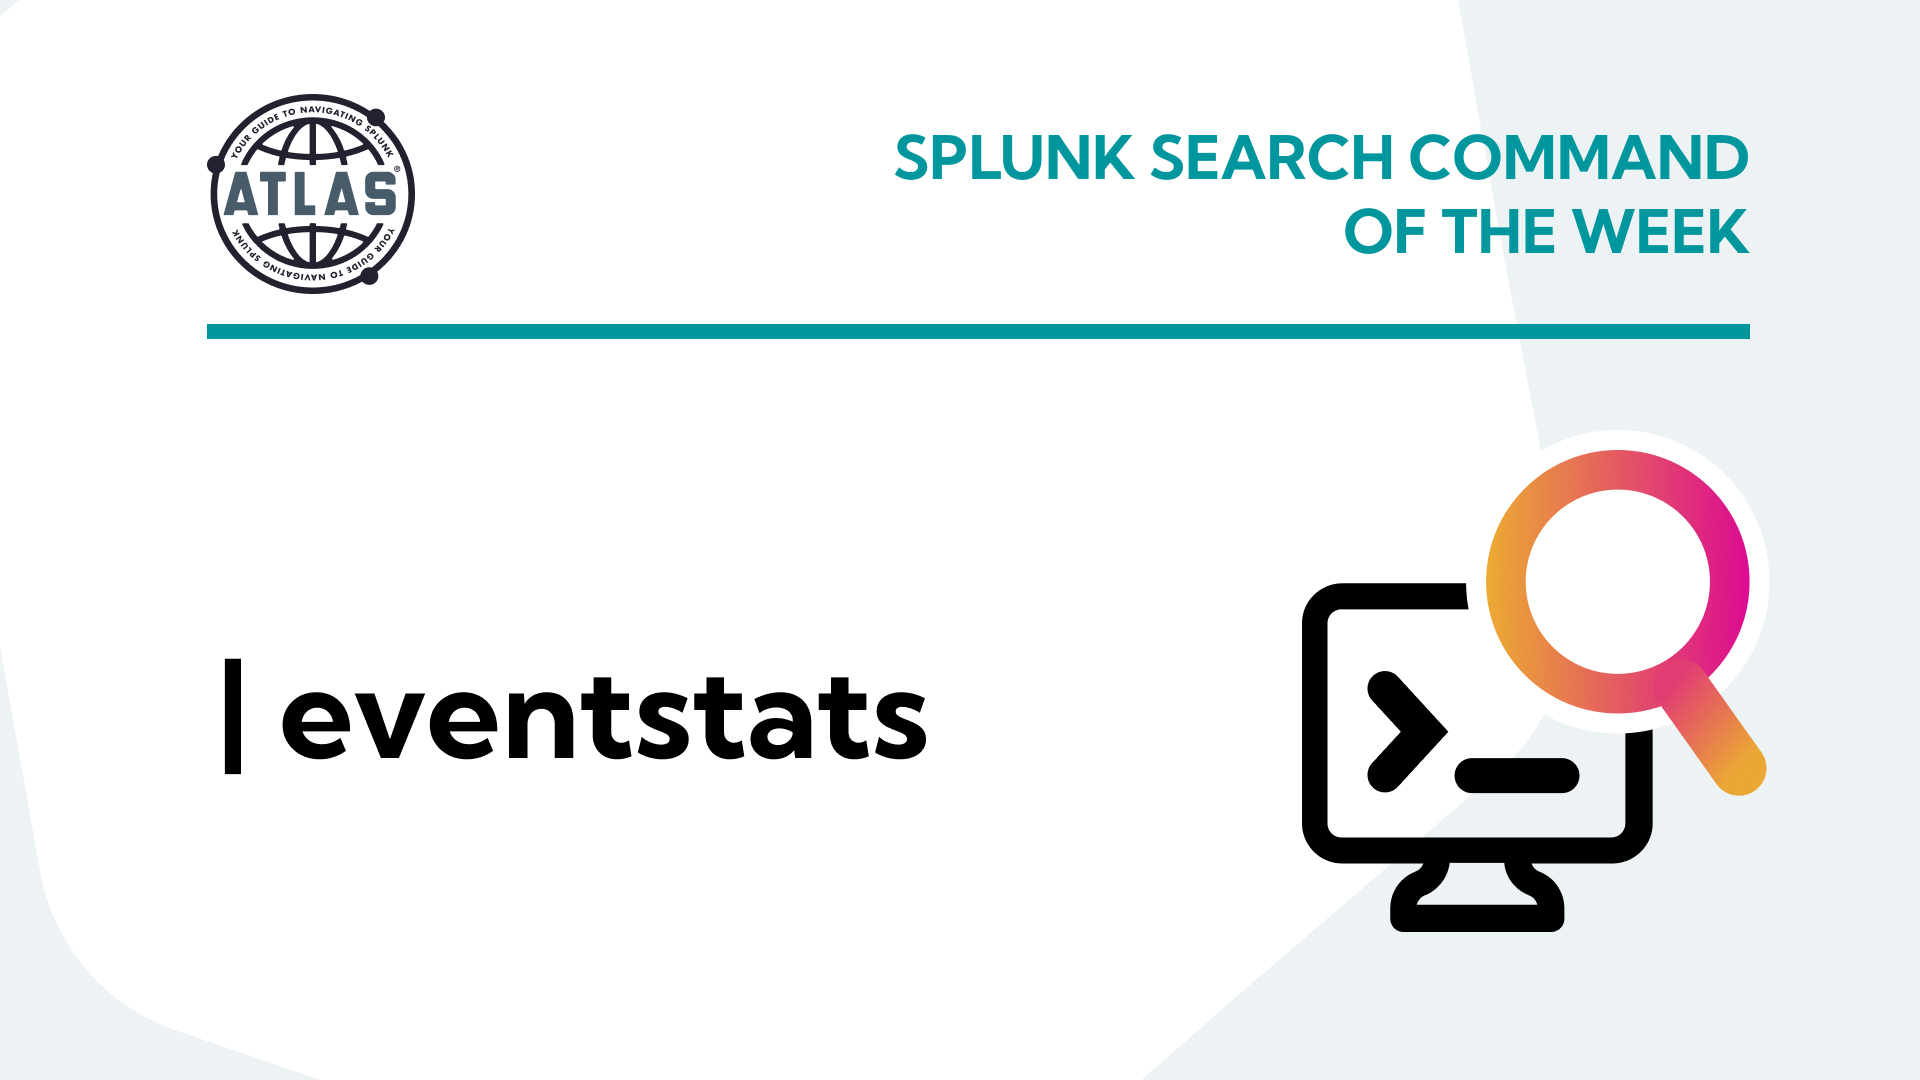 Splunk Search Command Of The Week: eventstats